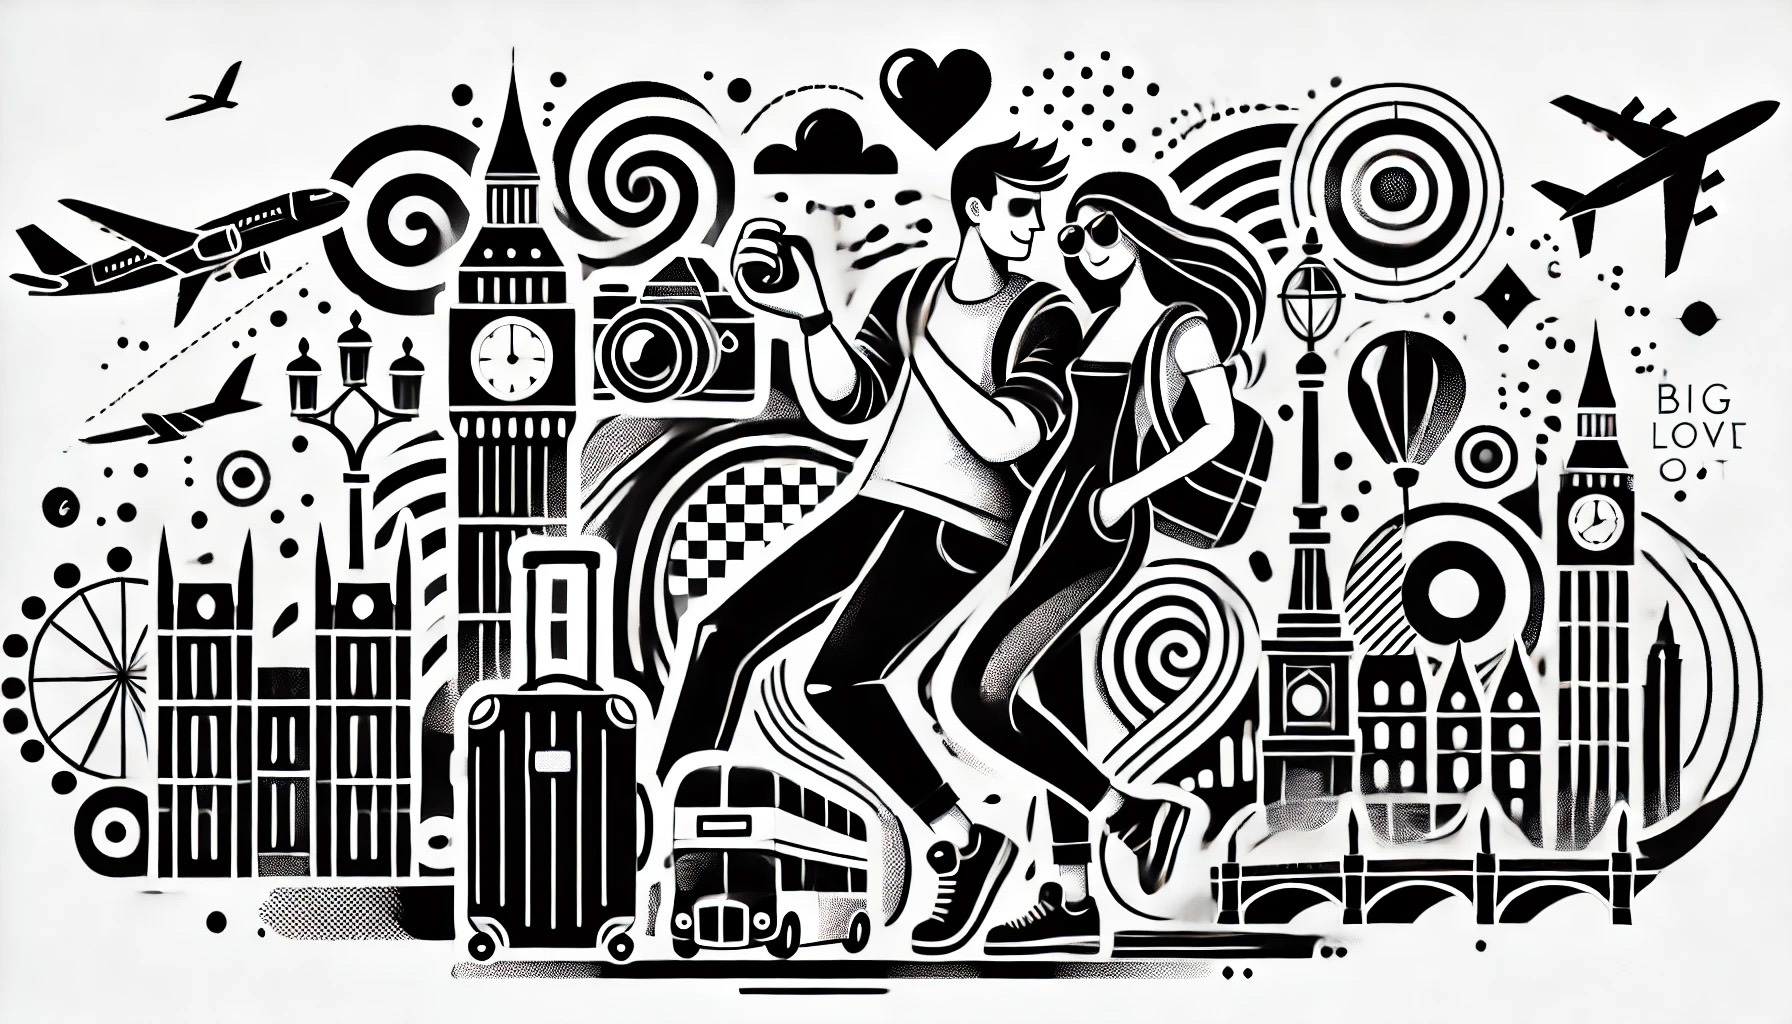 An abstract black and white vector illustration of a couple traveling. The illustration features elements such as a camera, suitcase, landmarks like Big Ben, and a heart symbolizing love. The couple is depicted in an abstract style, with the photographer holding a camera and taking a picture while the partner looks at a map or points to a location. The overall design is clean and minimalistic, balancing travel and photography elements.